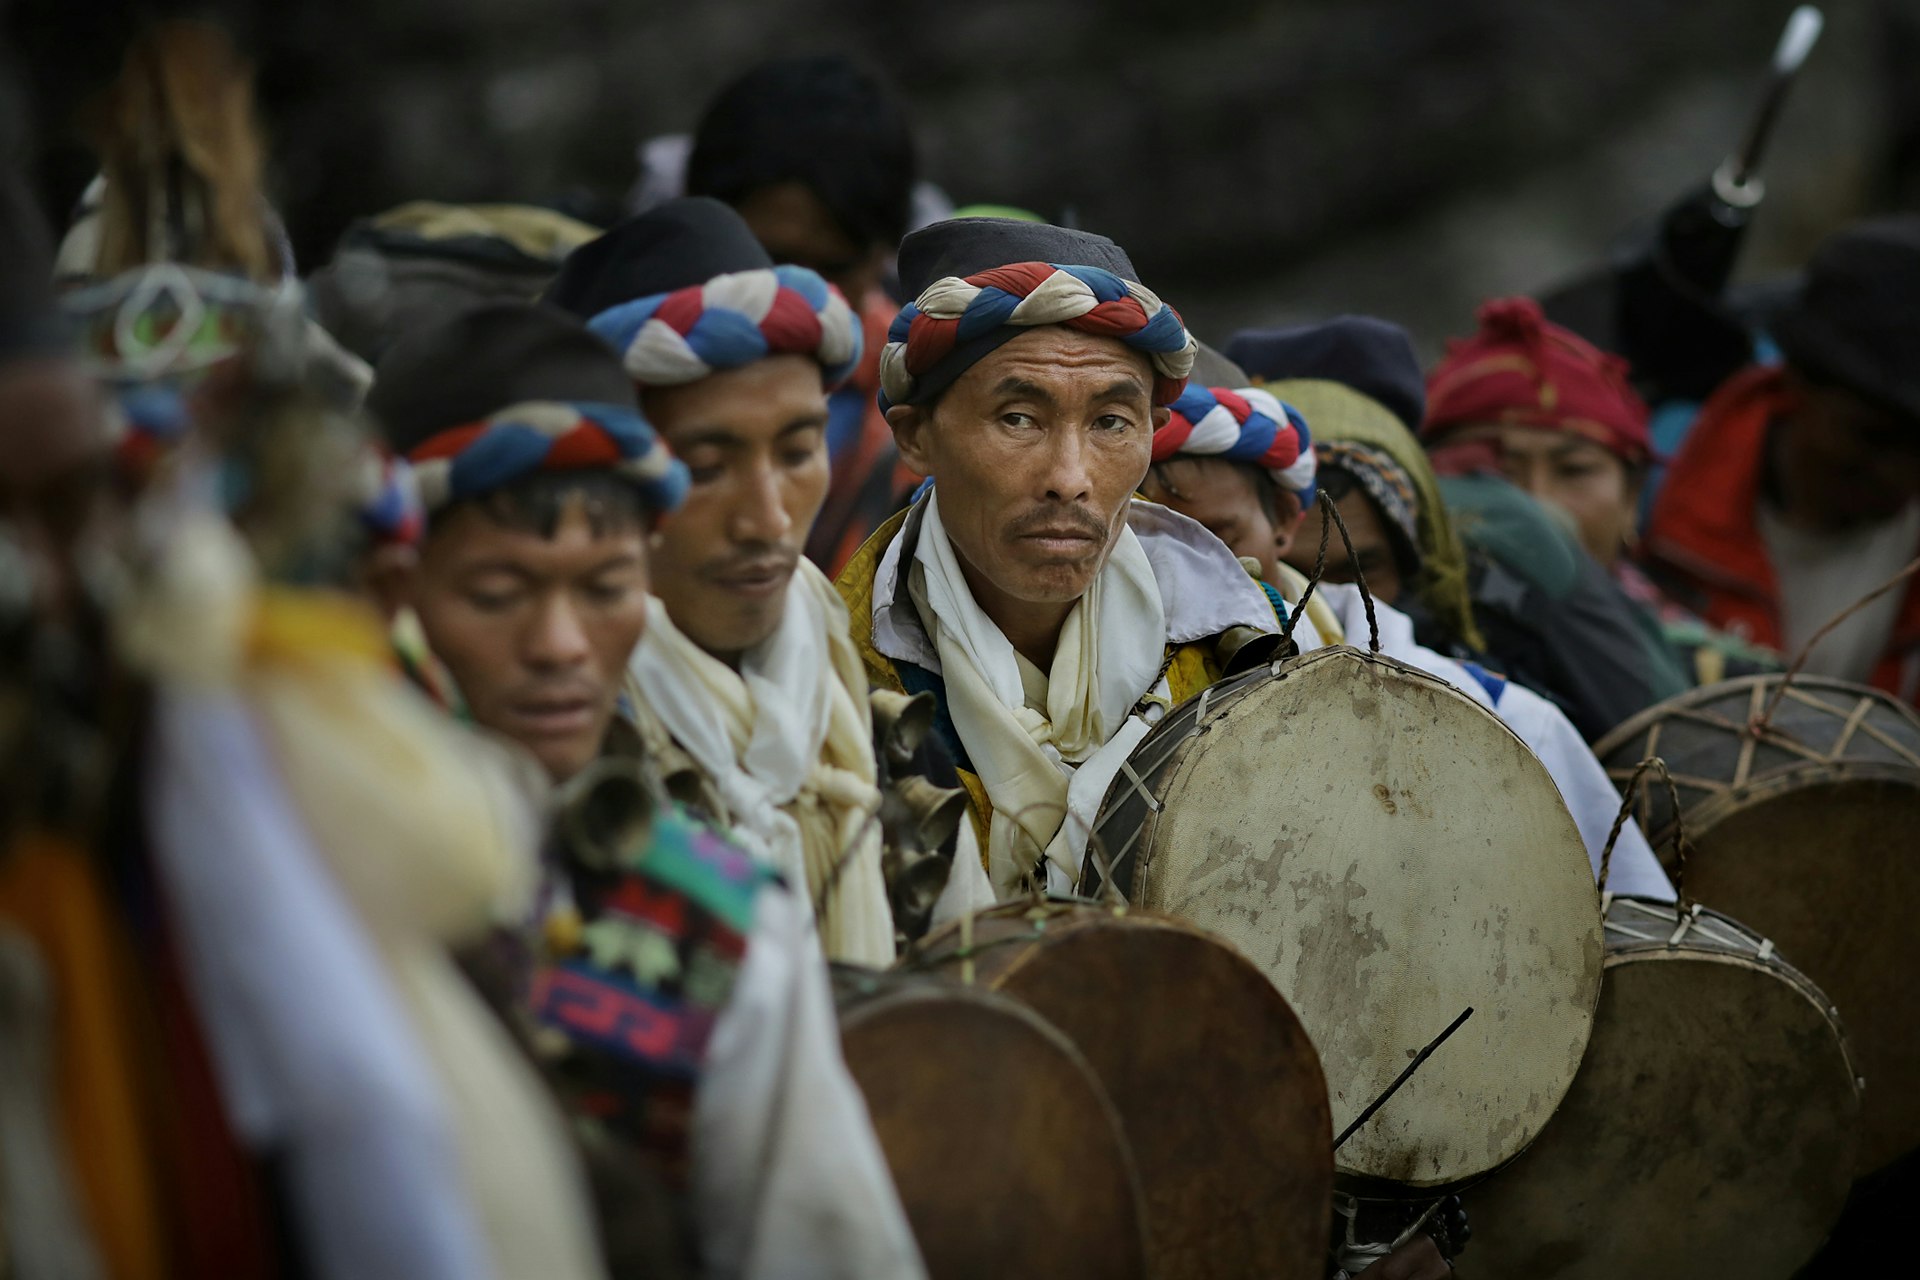 Indigenous Tamang shamans stand in a line holding dhyangro drums during a ritual. Every year at August full moon thousands of Hindu pilgrims and Jhankri shamans trek up to Gosaikunda Lake 4380m-high in the Himalaya mountains to bathe in its cleansing waters and participate in indigenous rituals. 